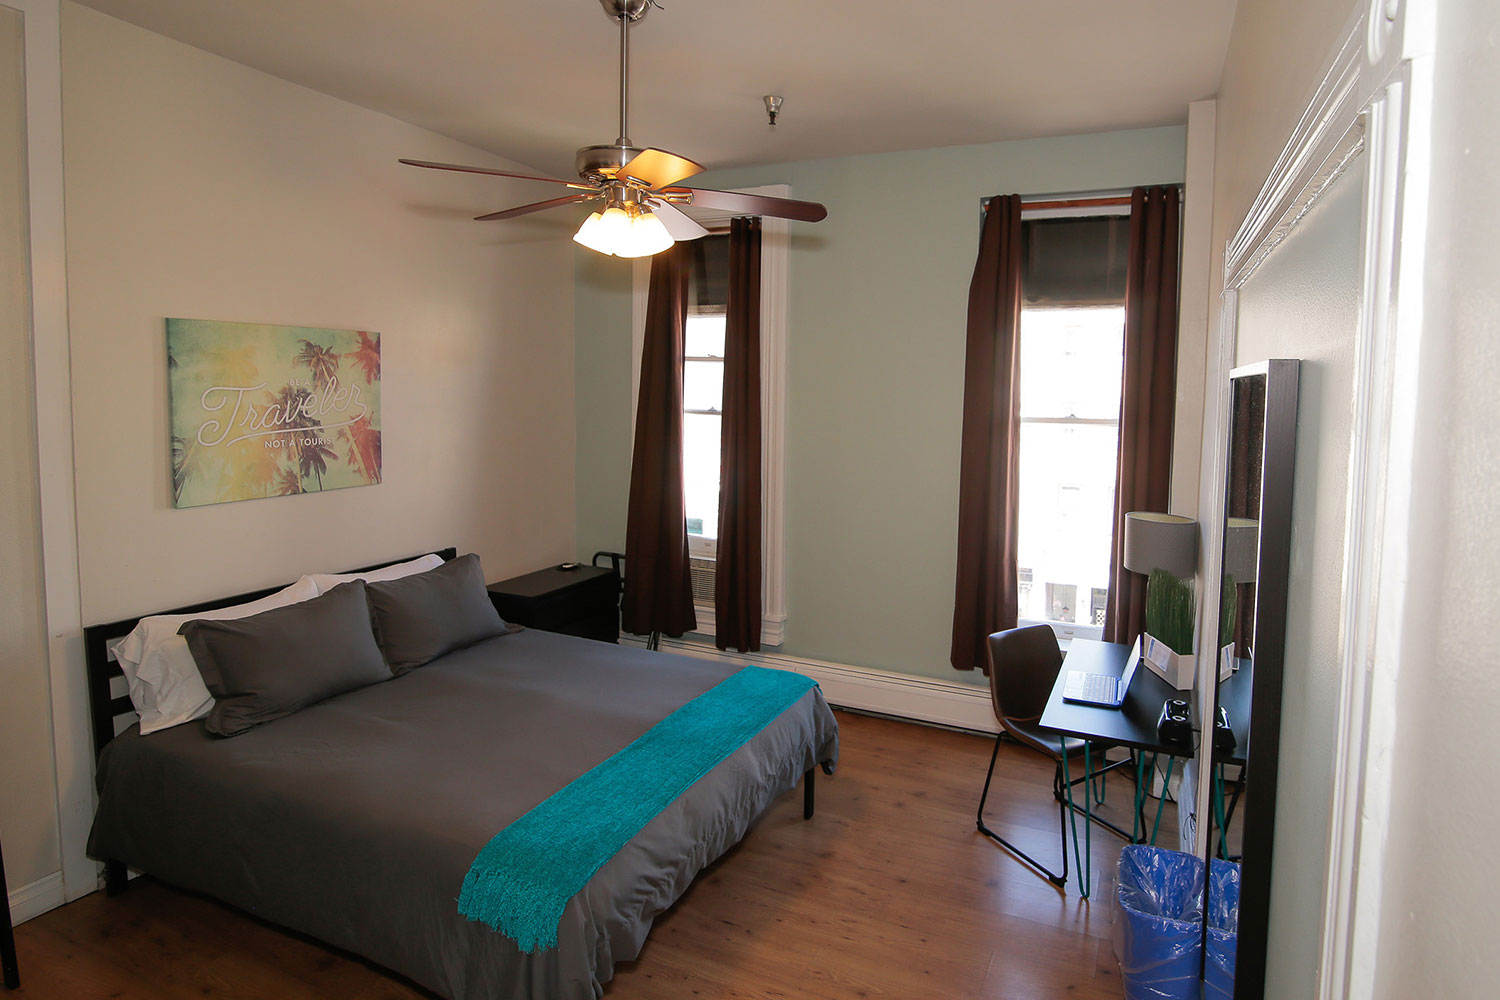 A private room at HI San Diego Downtown hostel with a freshly made queen-sized bed, two windows, and a desk and chair.